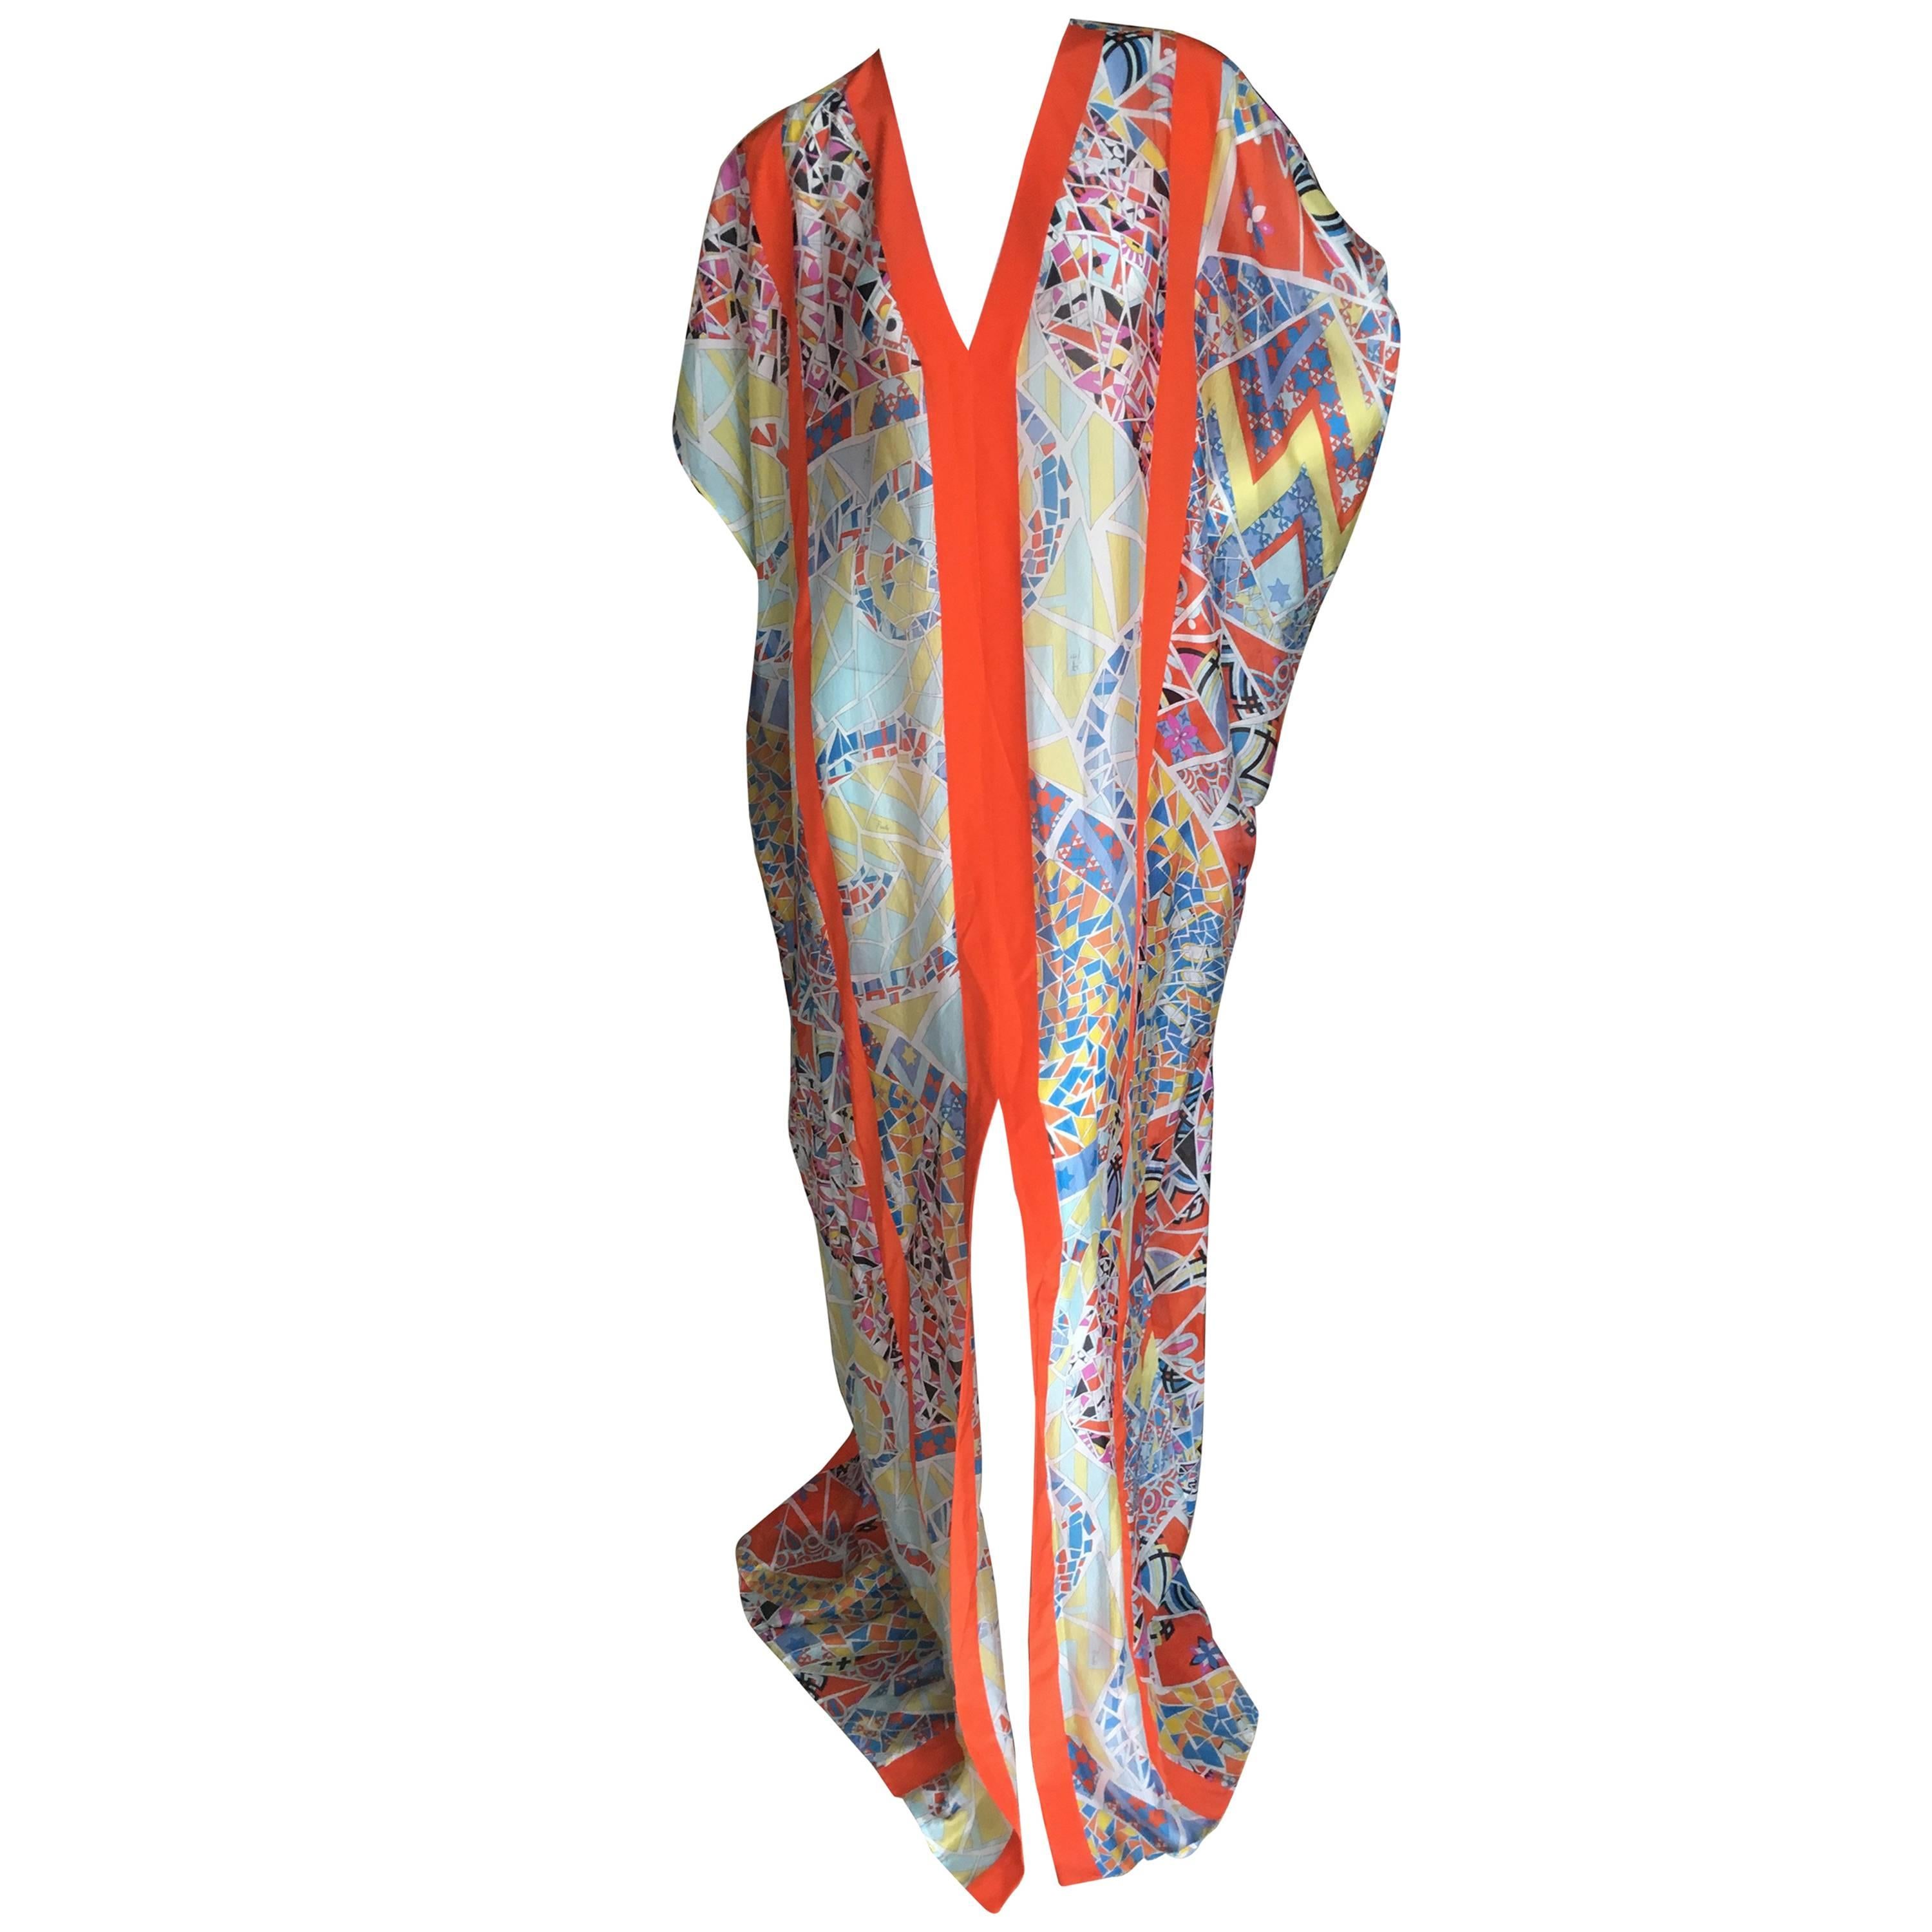 Emilio Pucci Sheer Kaleidoscope Silk Caftan Beach Coverup New with Tags Unisex For Sale